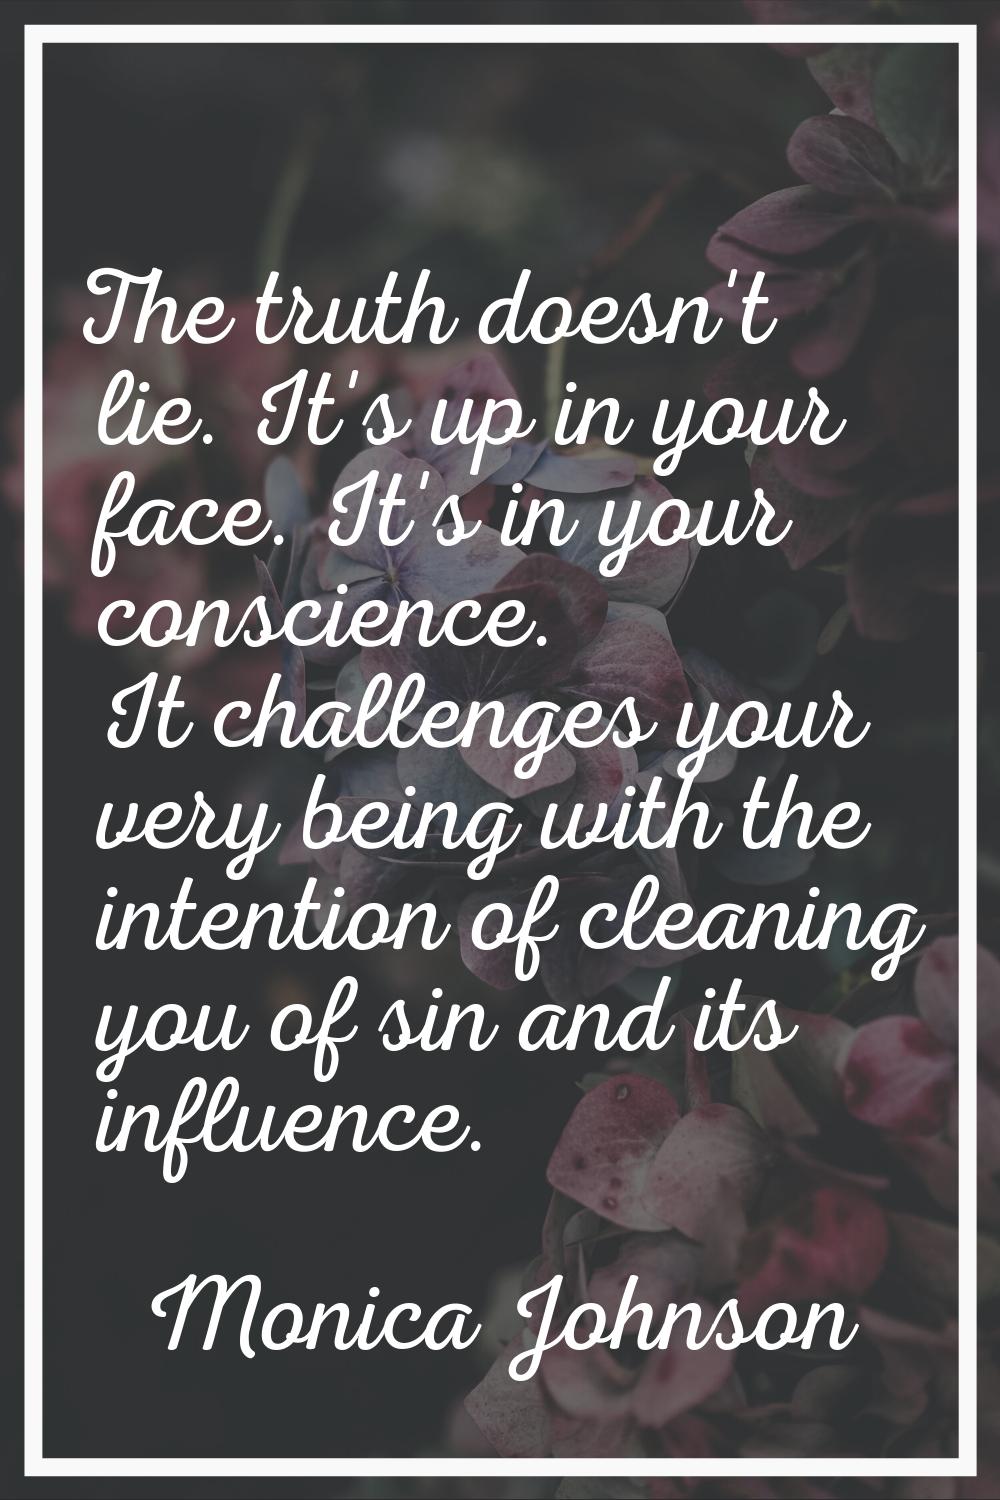 The truth doesn't lie. It's up in your face. It's in your conscience. It challenges your very being